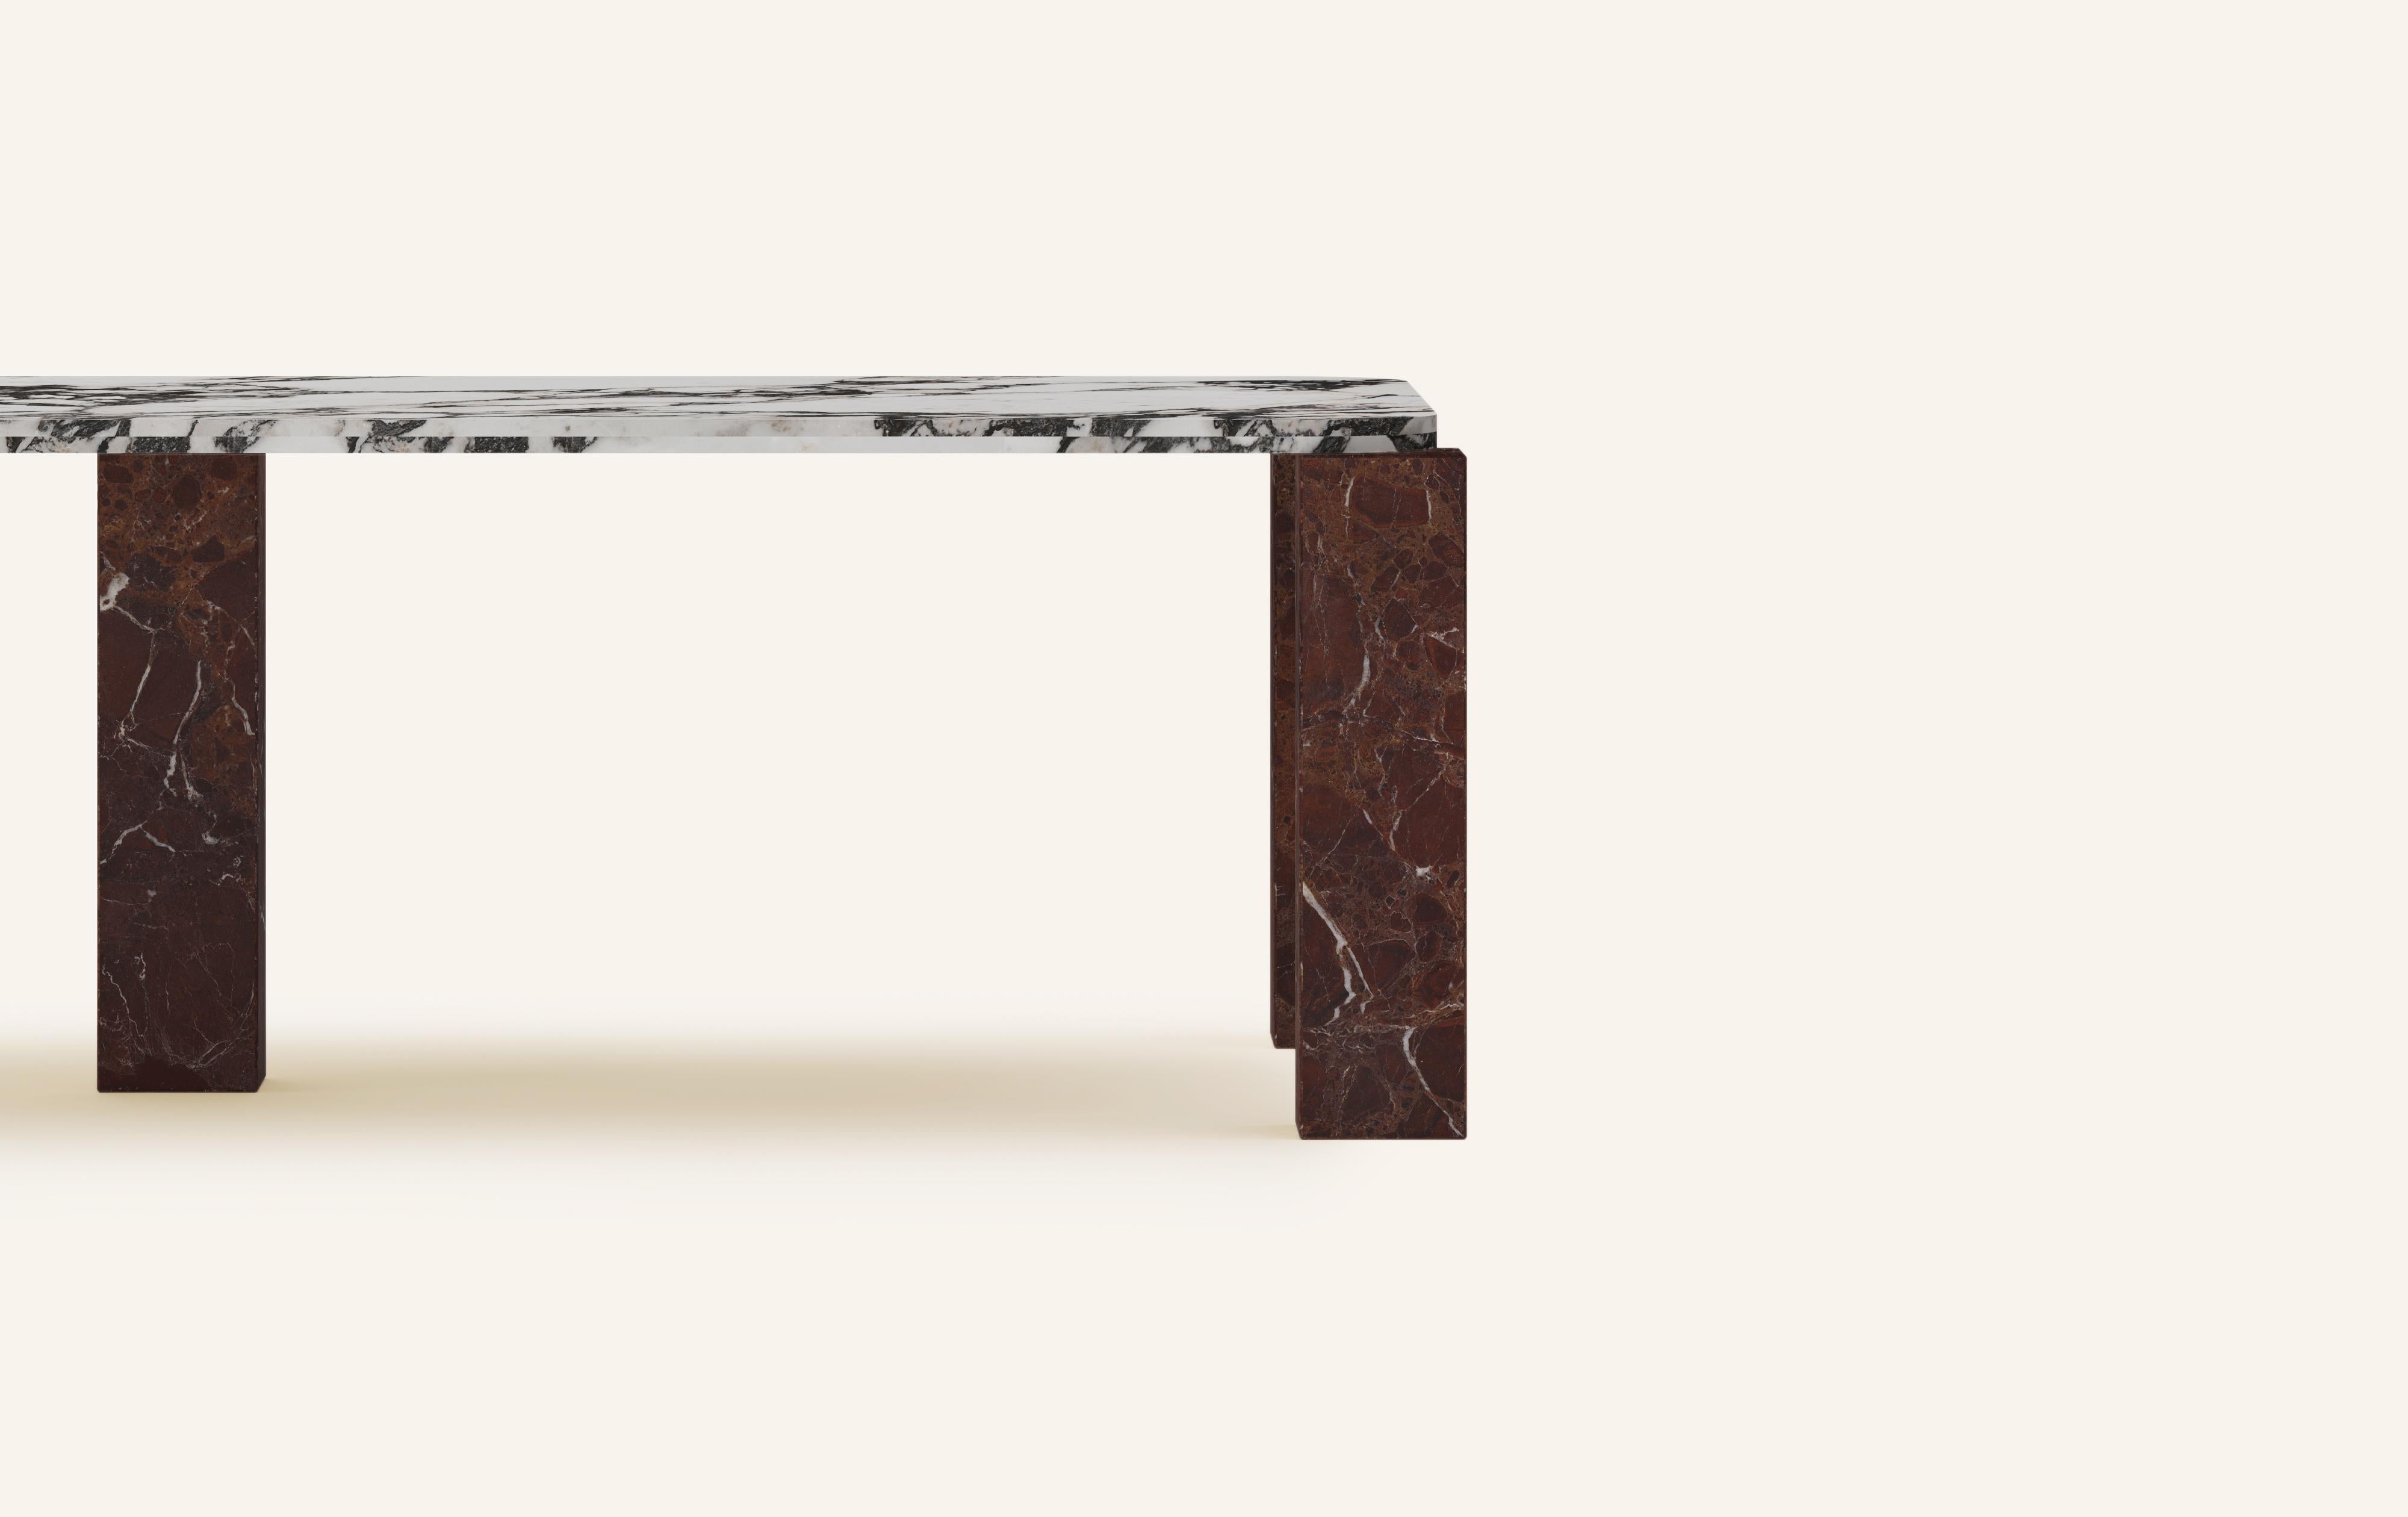 American FORM(LA) Cubo Rectangle Dining Table 110”L x 50”W x 30”H Viola & Rosso Marble For Sale